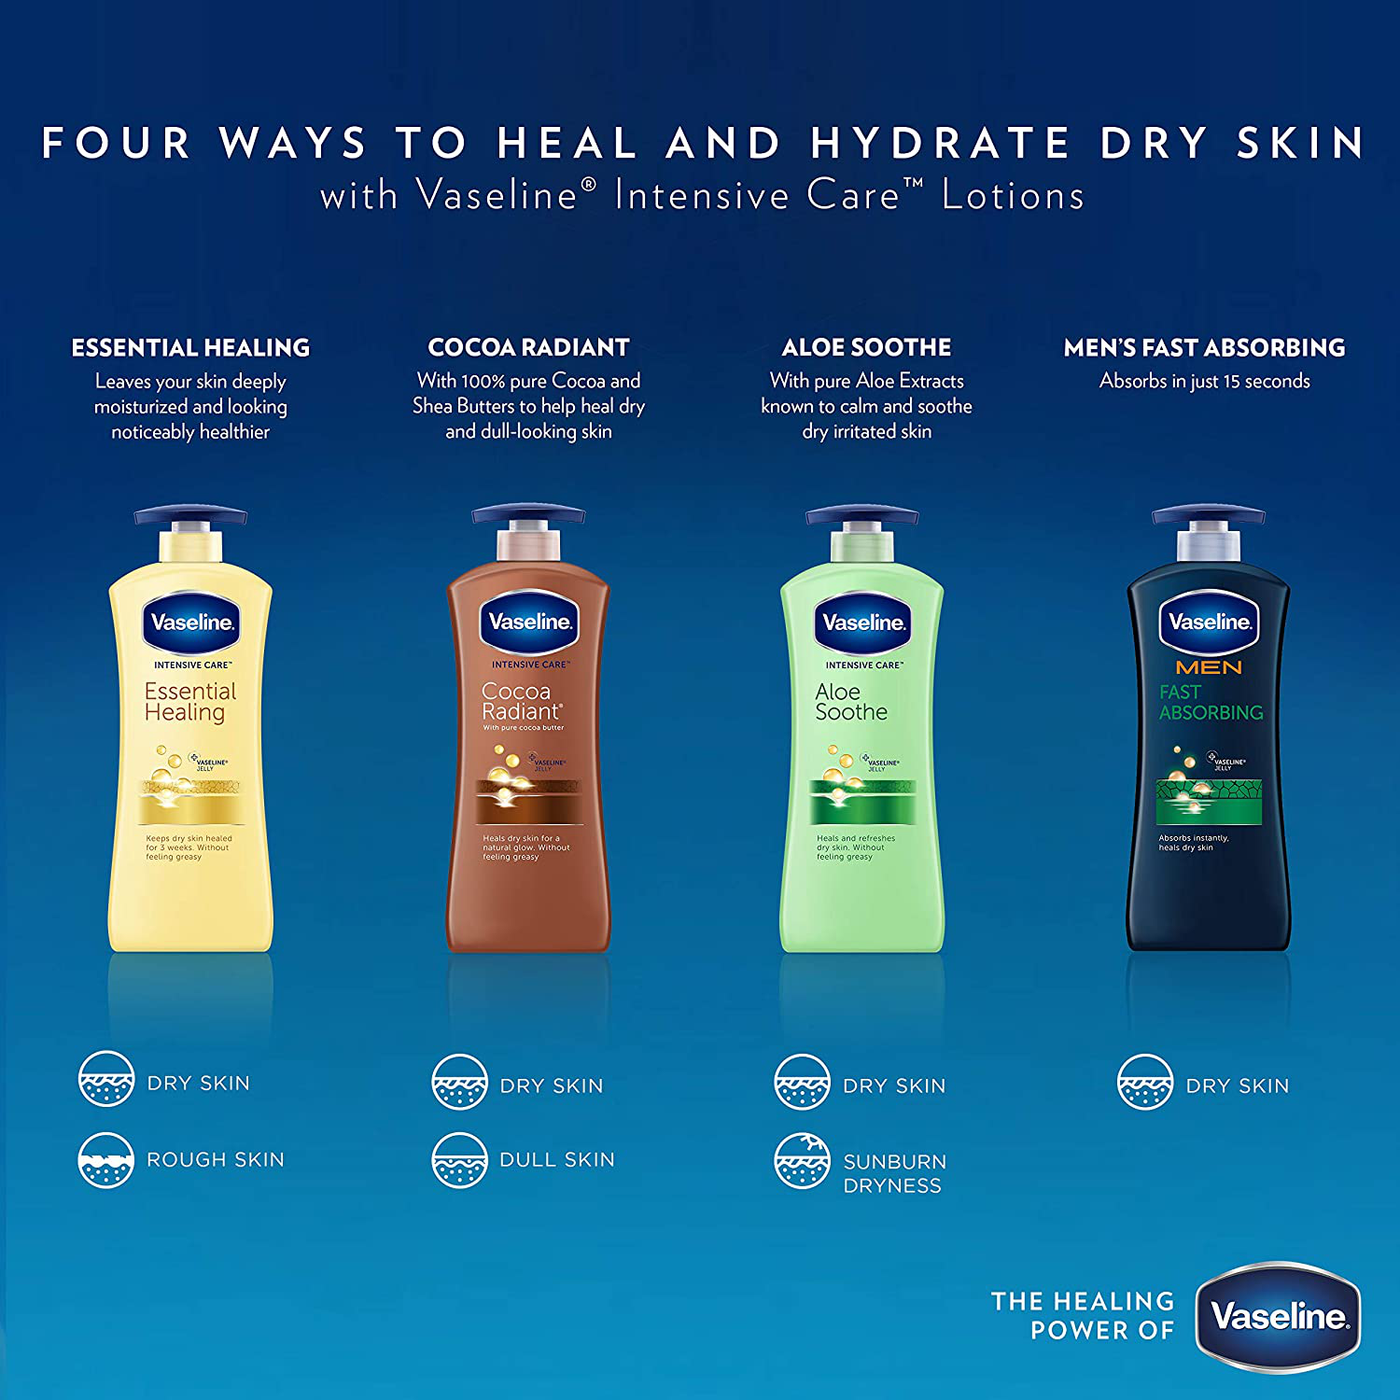 Vaseline hand and body lotion Intensive Care Moisturizer for Dry Skin Essential Healing Clinically Proven to Moisturize Deeply With One Application 20.3 oz 3 count